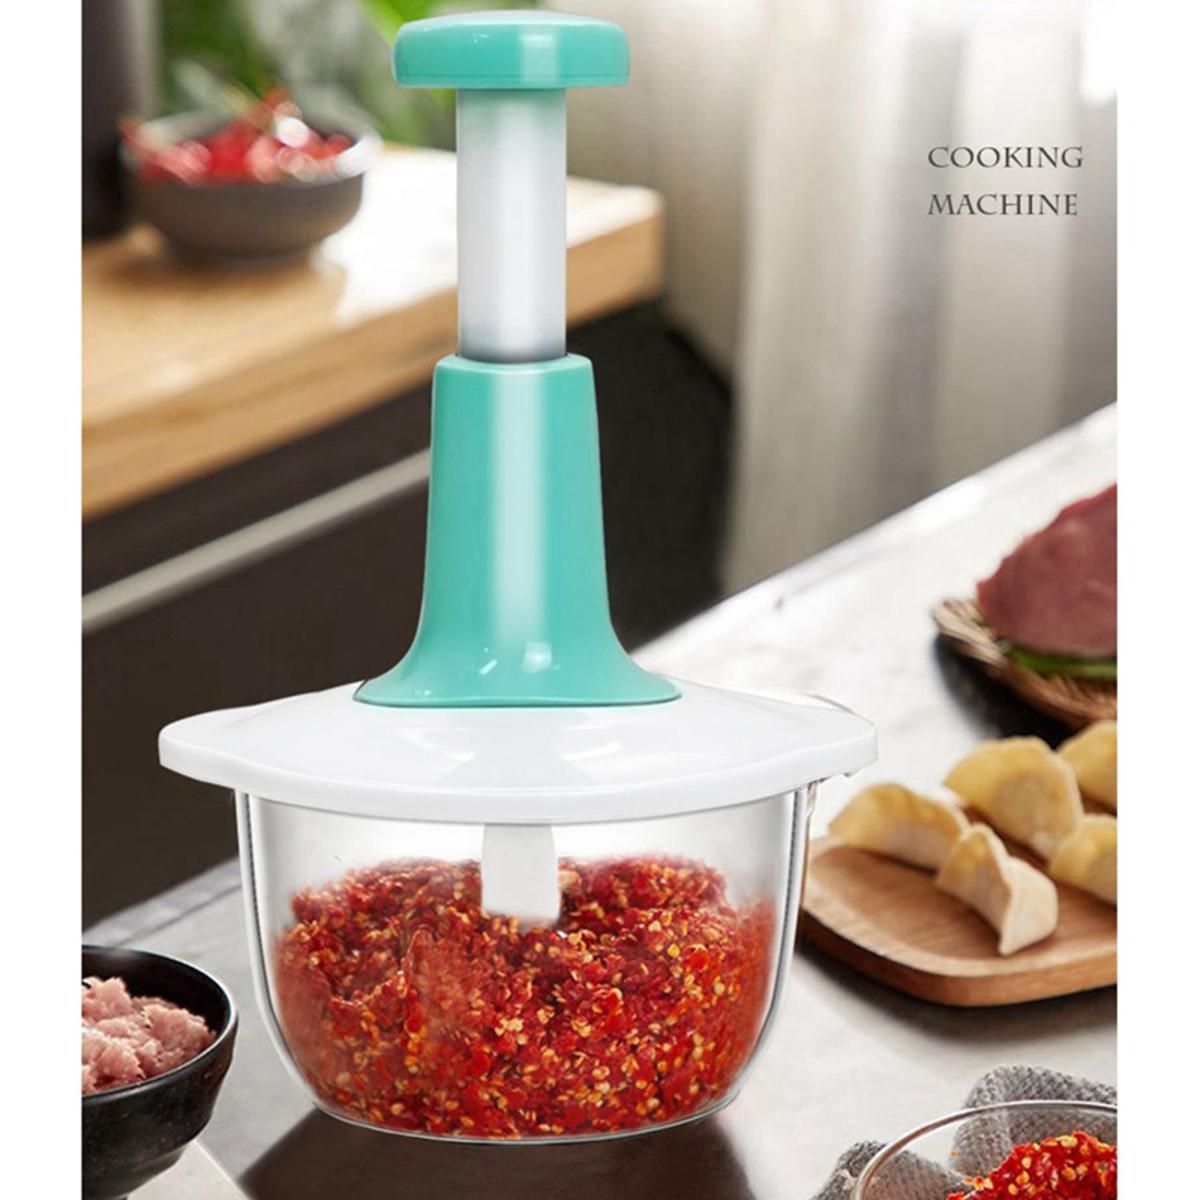 https://www.oshi.pk/images/variation/multifunctional-manual-hand-press-food-chopper-multifunctional-ultra-heavy-hand-push-speedy-chopper-with-3-turbo-stainless-steel-blades-perfect-onio-17049-025.jpg